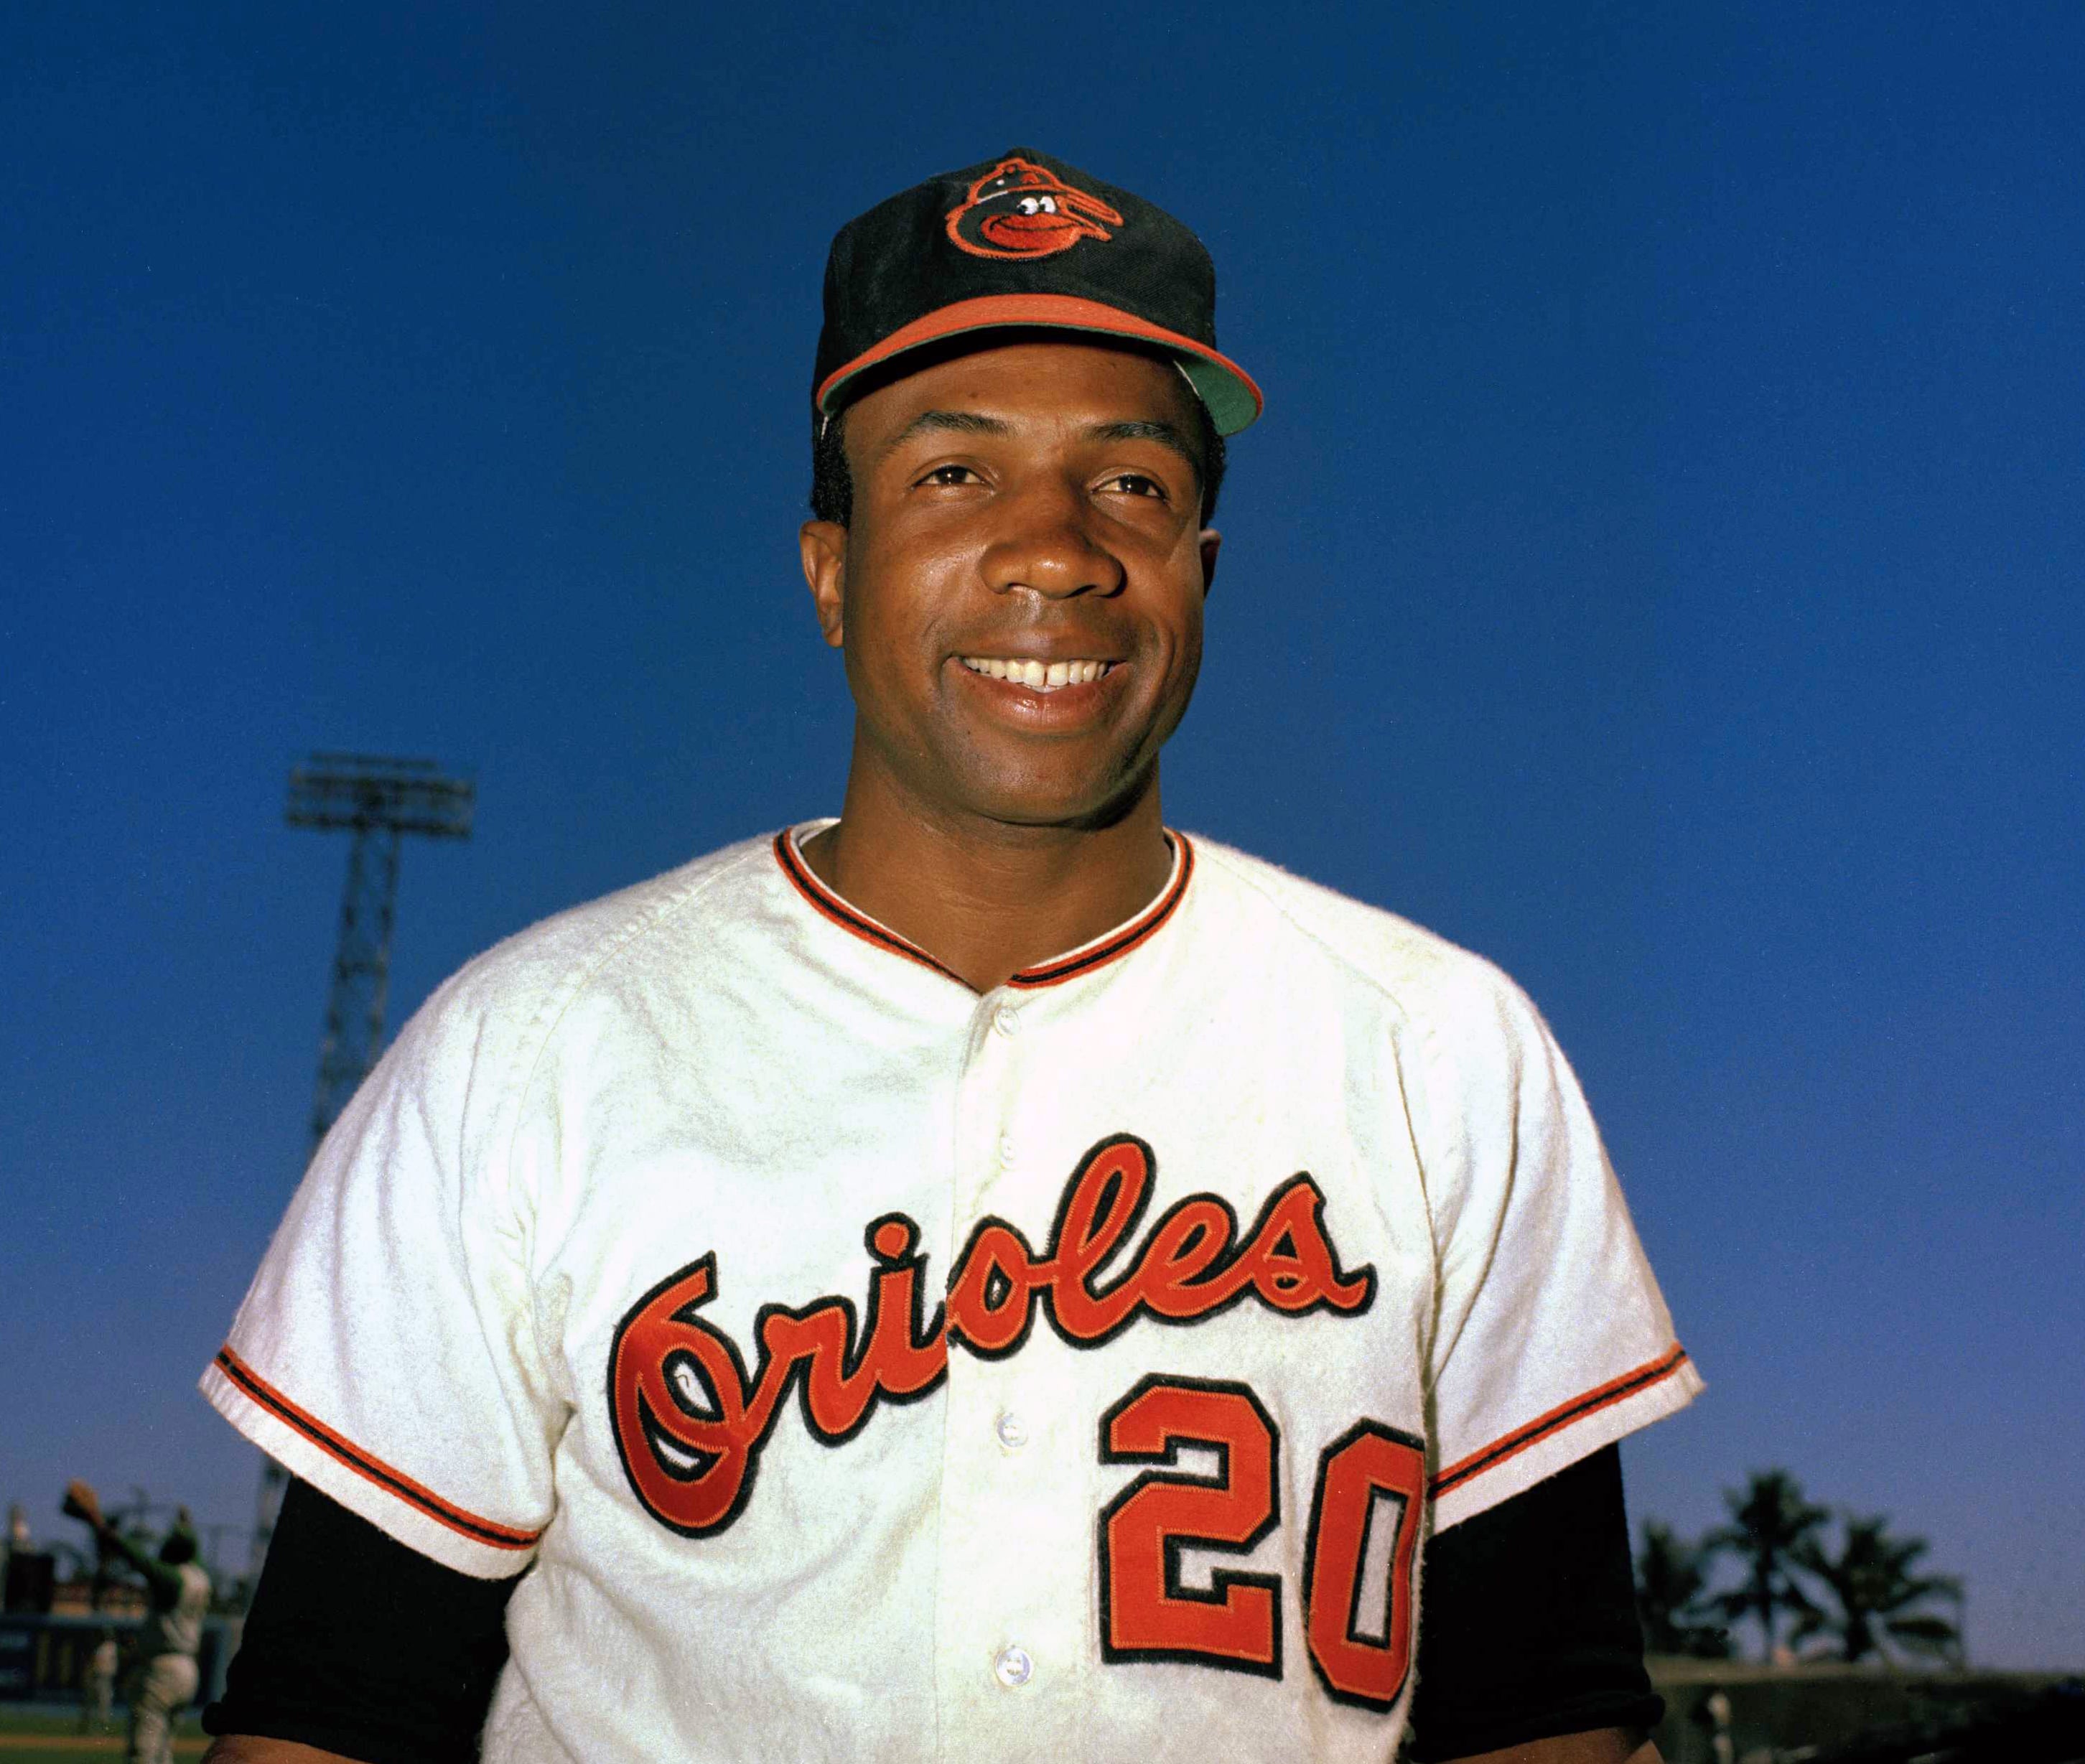 Baltimore Orioles outfielder Frank Robinson in 1967. The Hall of Famer, the first black manager in Major League Baseball and the only player to win the MVP award in both leagues, has died. He was 83. Robinson had been in hospice care at his home in Bel Air. MLB confirmed his death Thursday, Feb. 7, 2019.